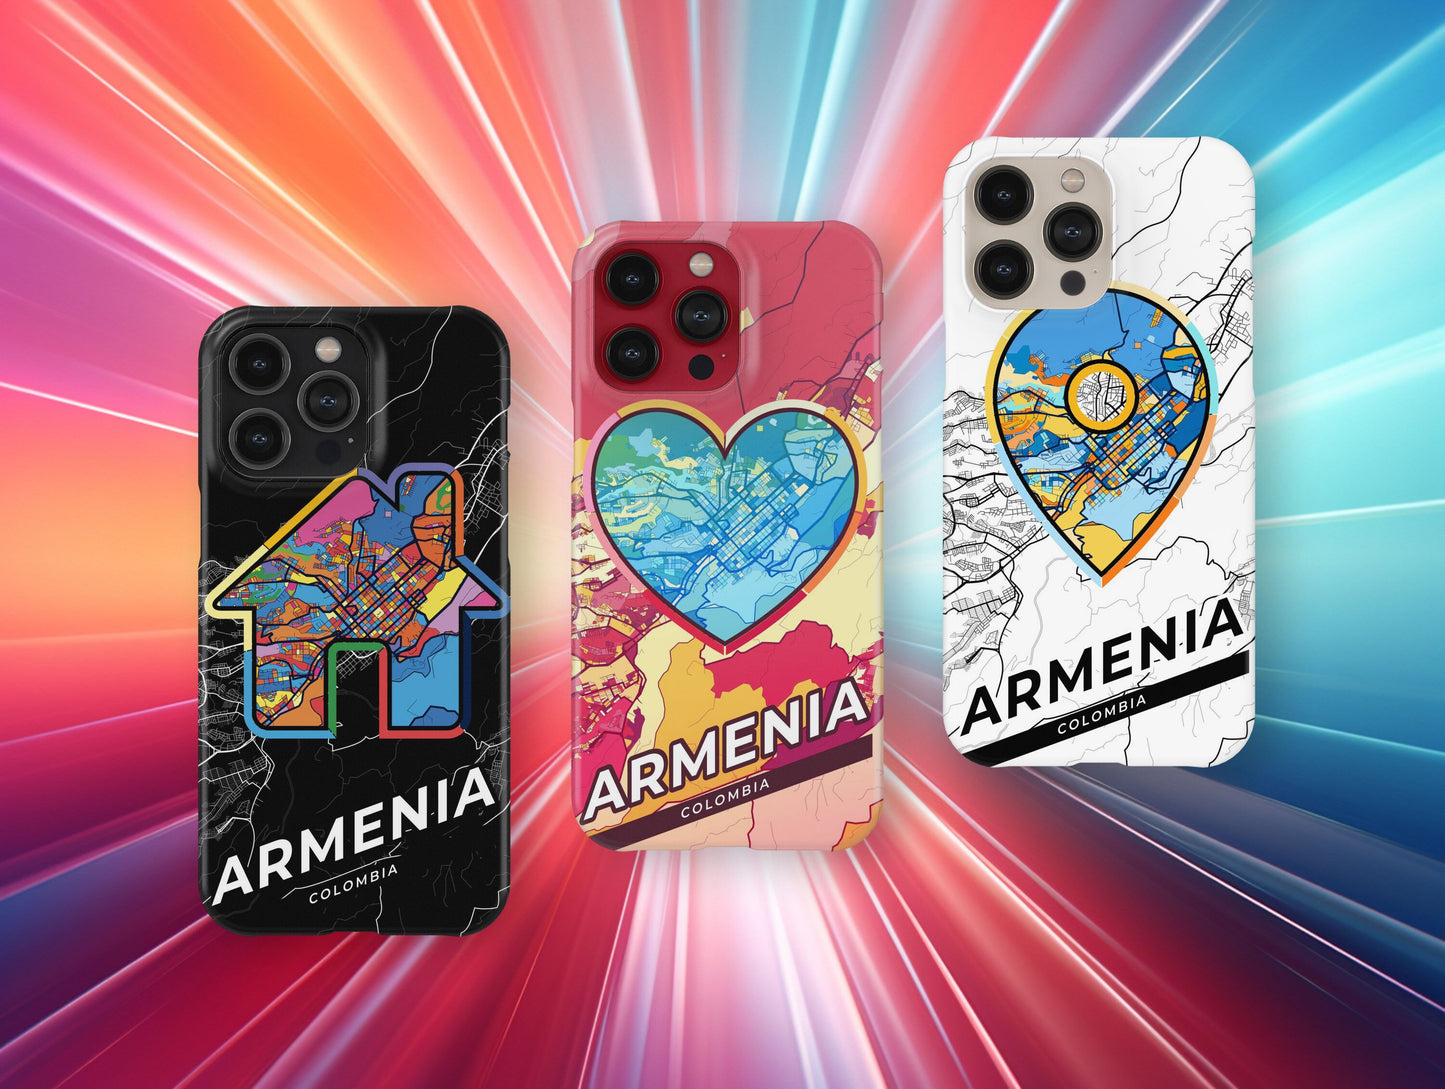 Armenia Colombia slim phone case with colorful icon. Birthday, wedding or housewarming gift. Couple match cases.